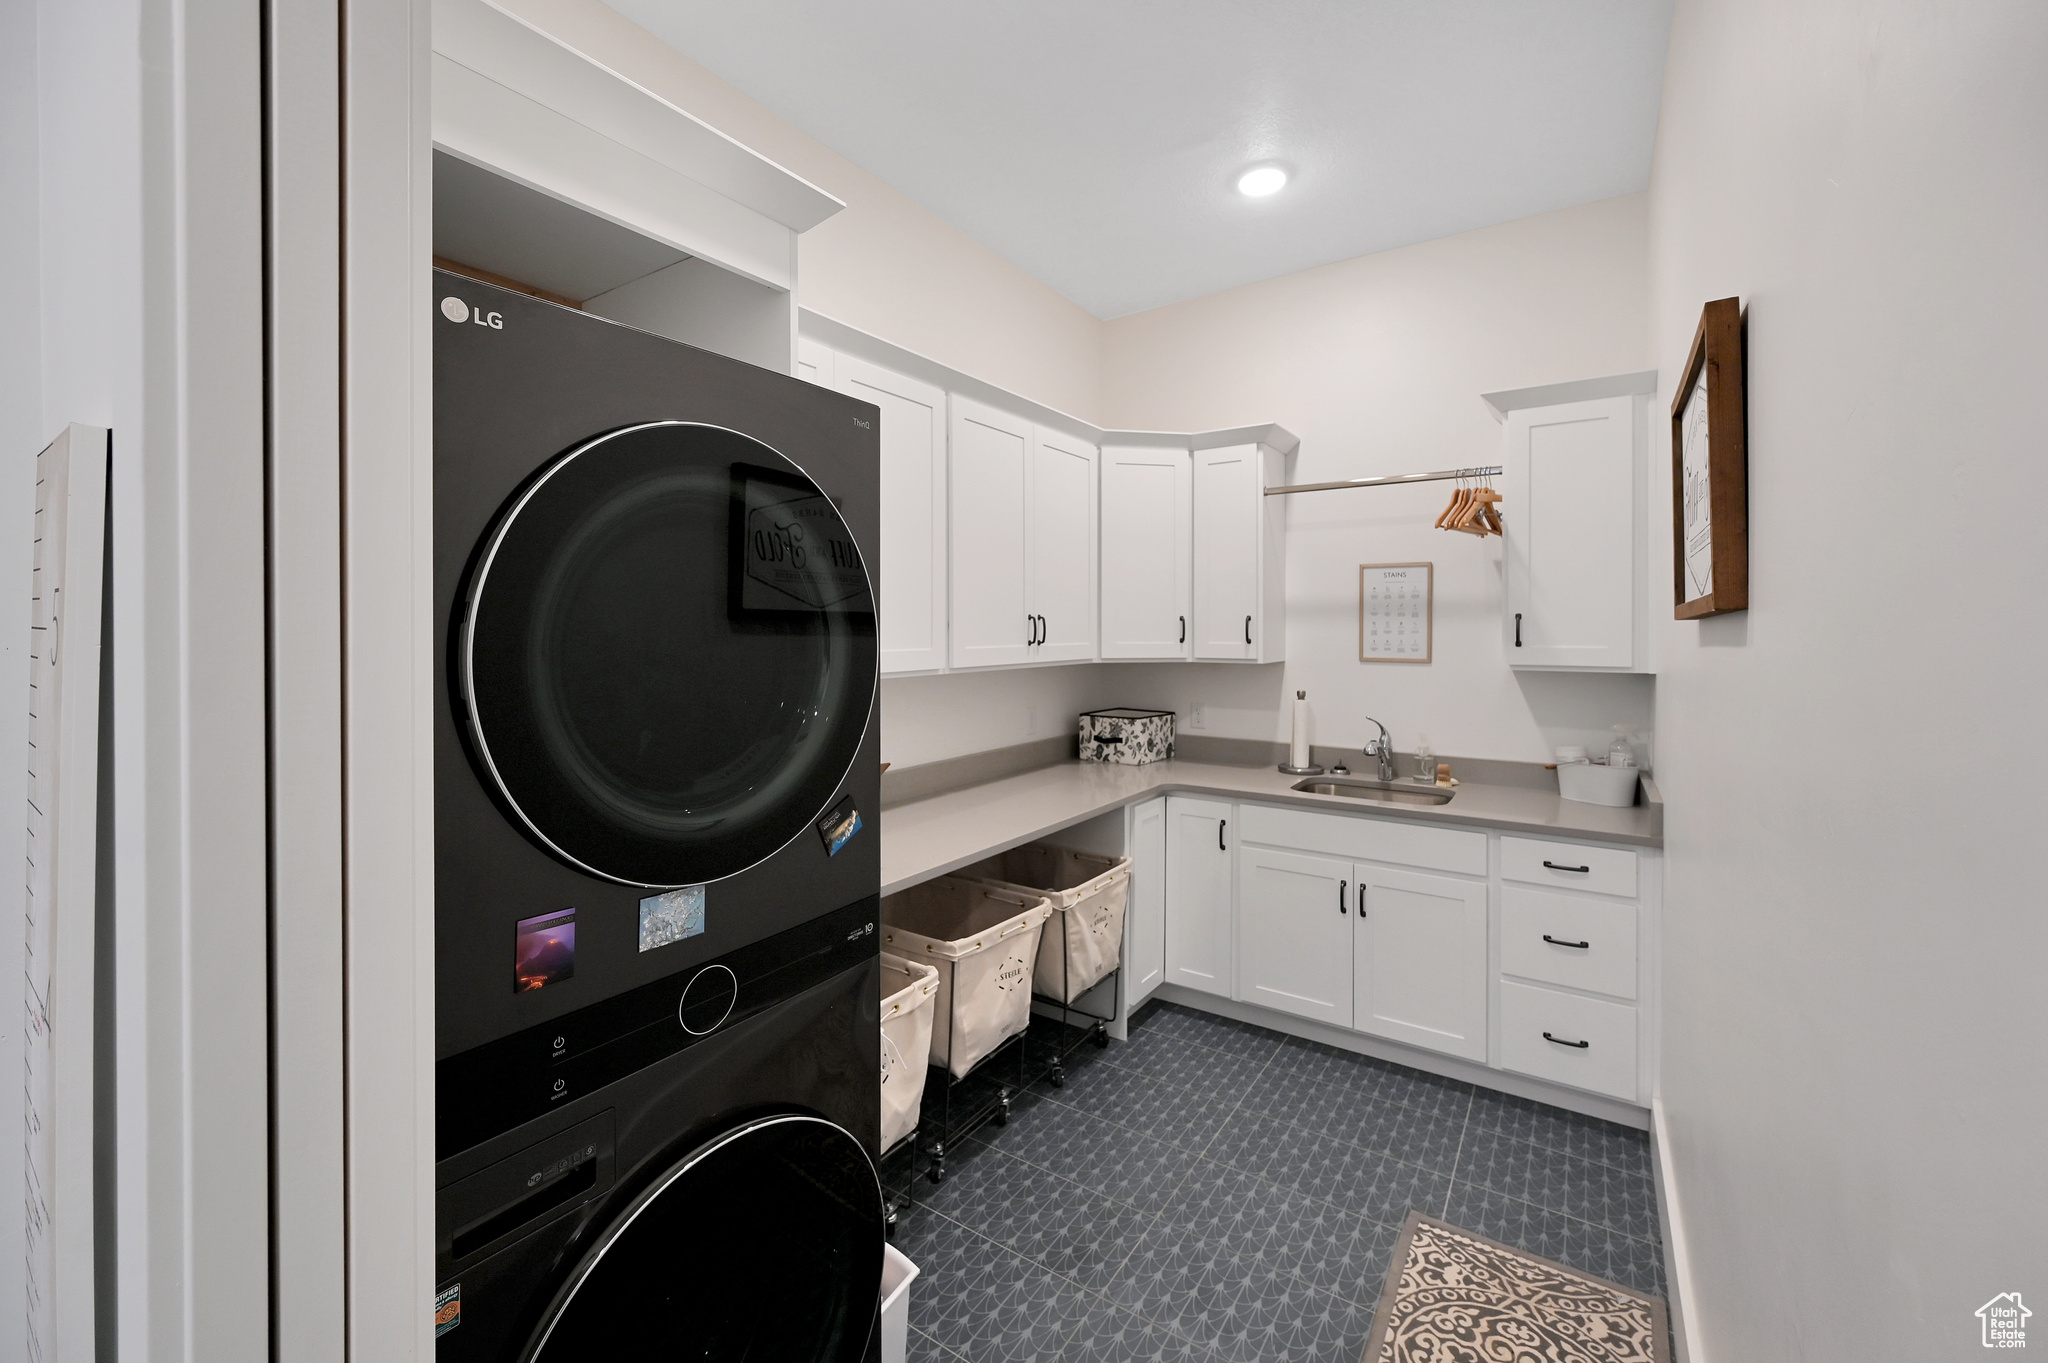 Clothes washing area with cabinets, stacked washer and clothes dryer, sink, and dark tile floors